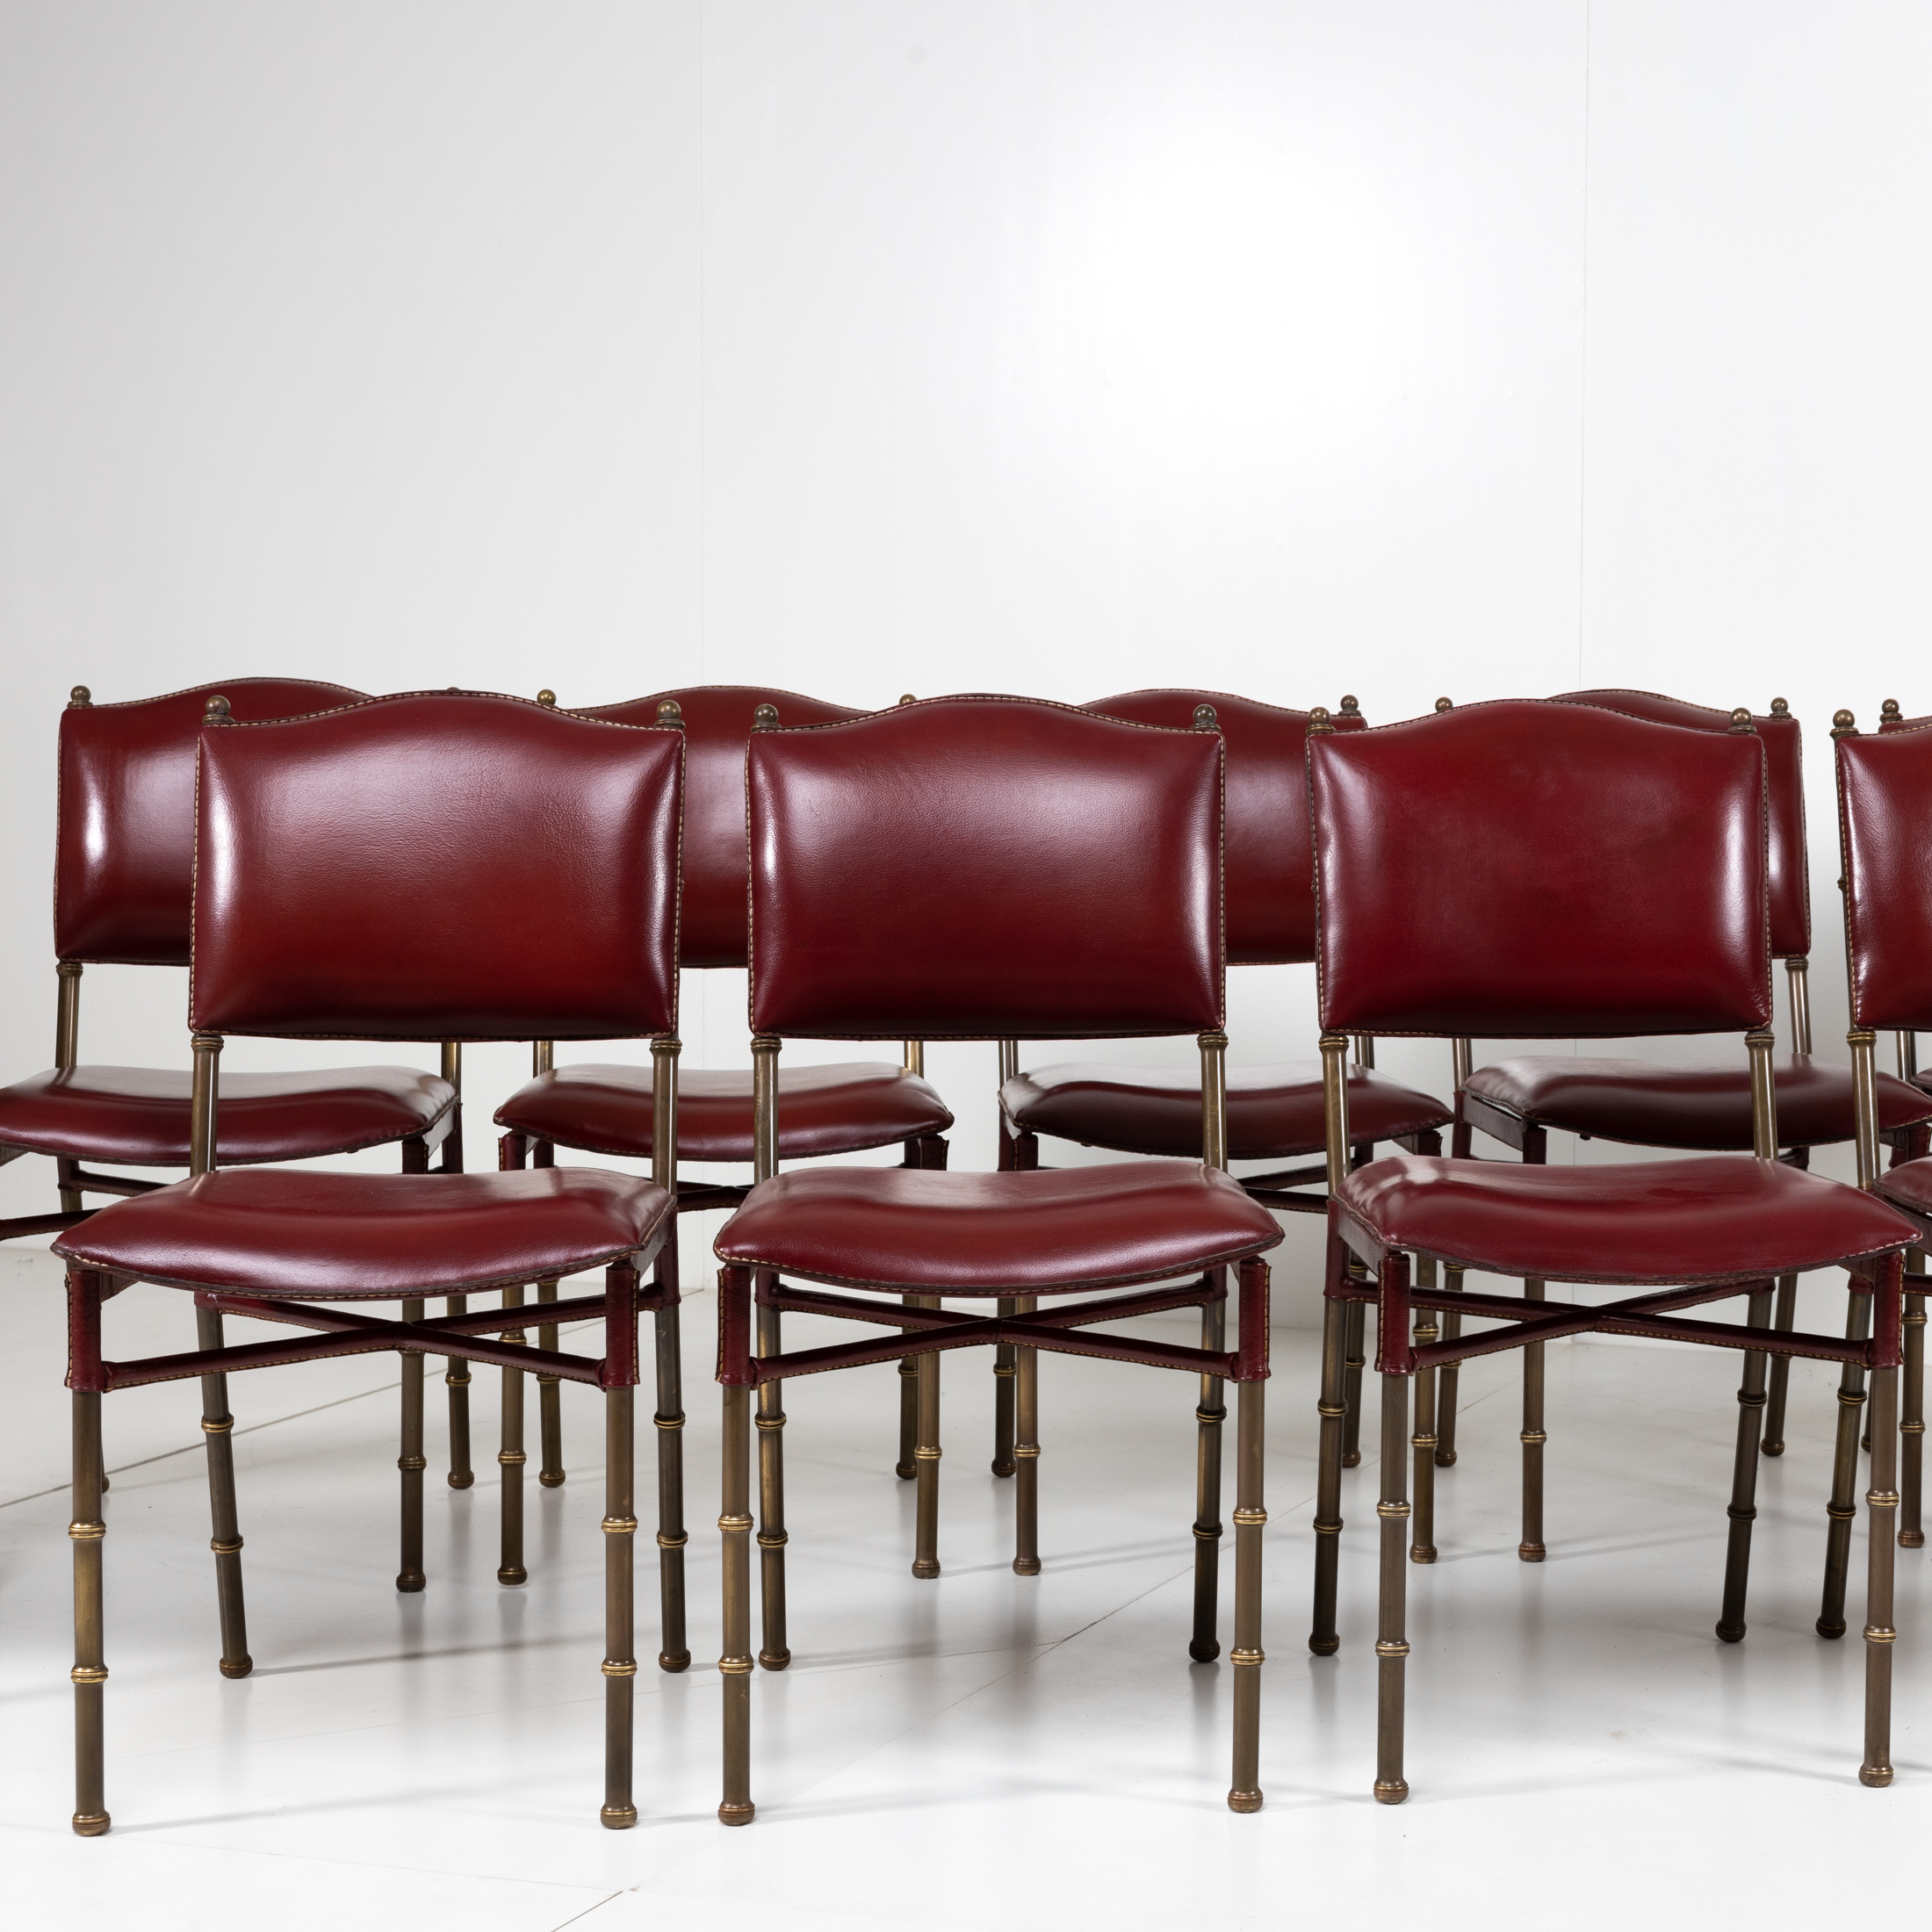 ZE15 Set armchairs and chairs saddle stitched red leather by Jacques Adnet -7